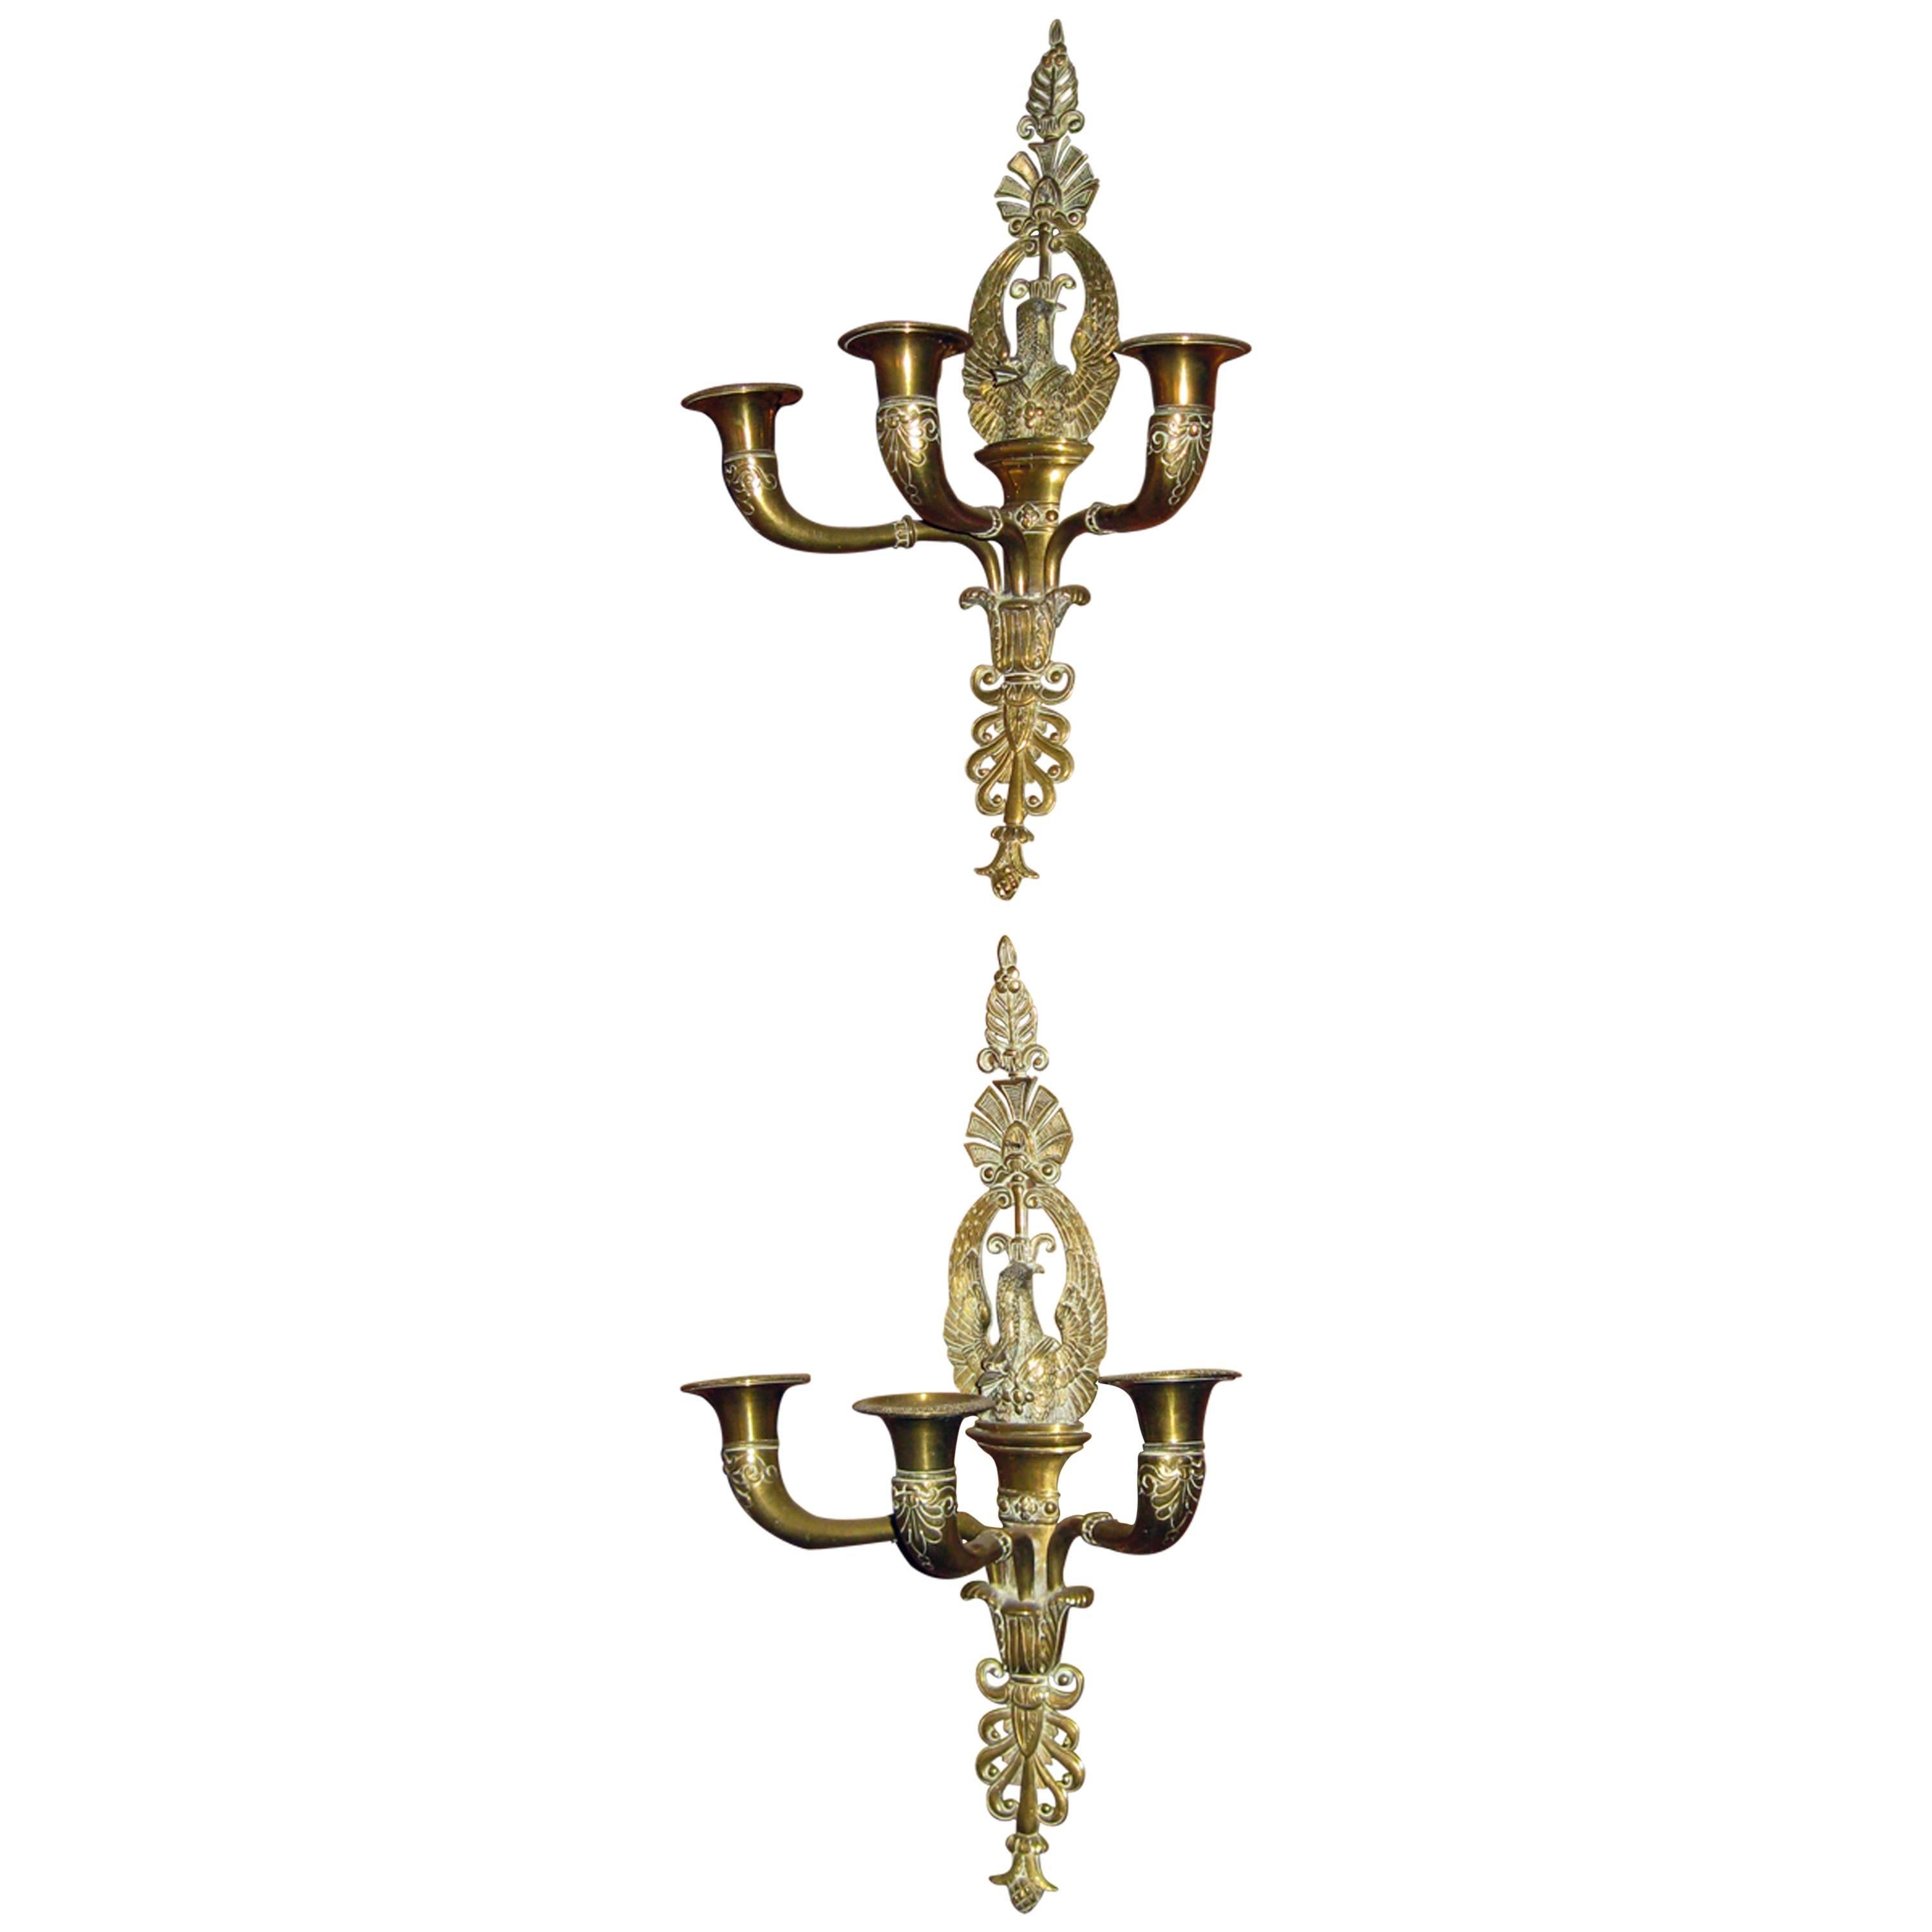 19th century French Empire Swan Motif Sconce Pair